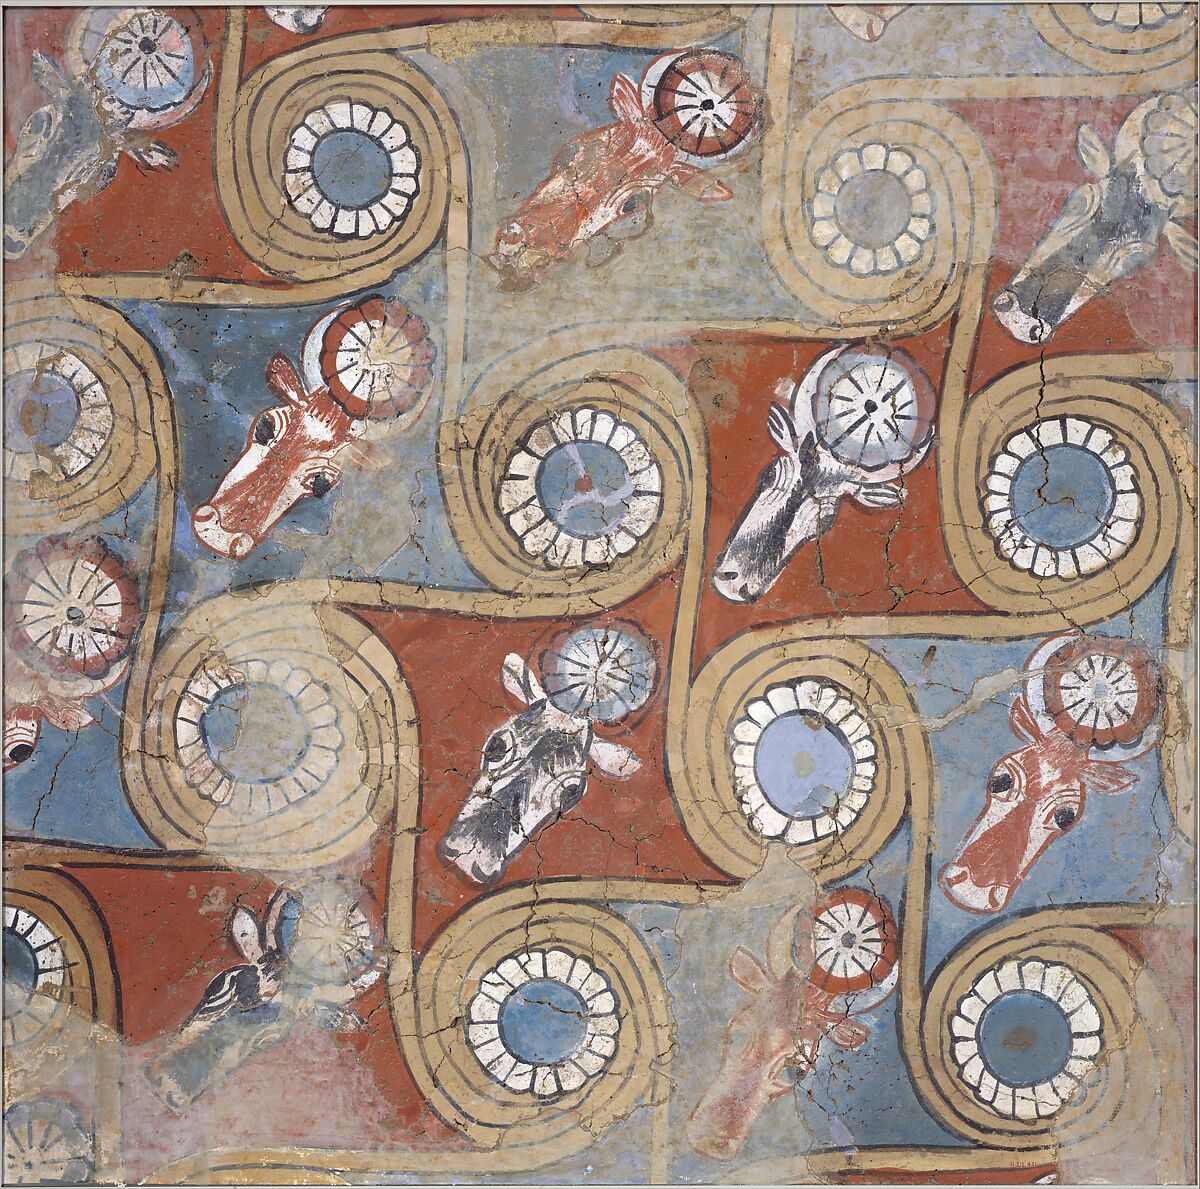 Ceiling painting from the palace of Amenhotep III, Dried Mud, mud plaster, paint, gesso 